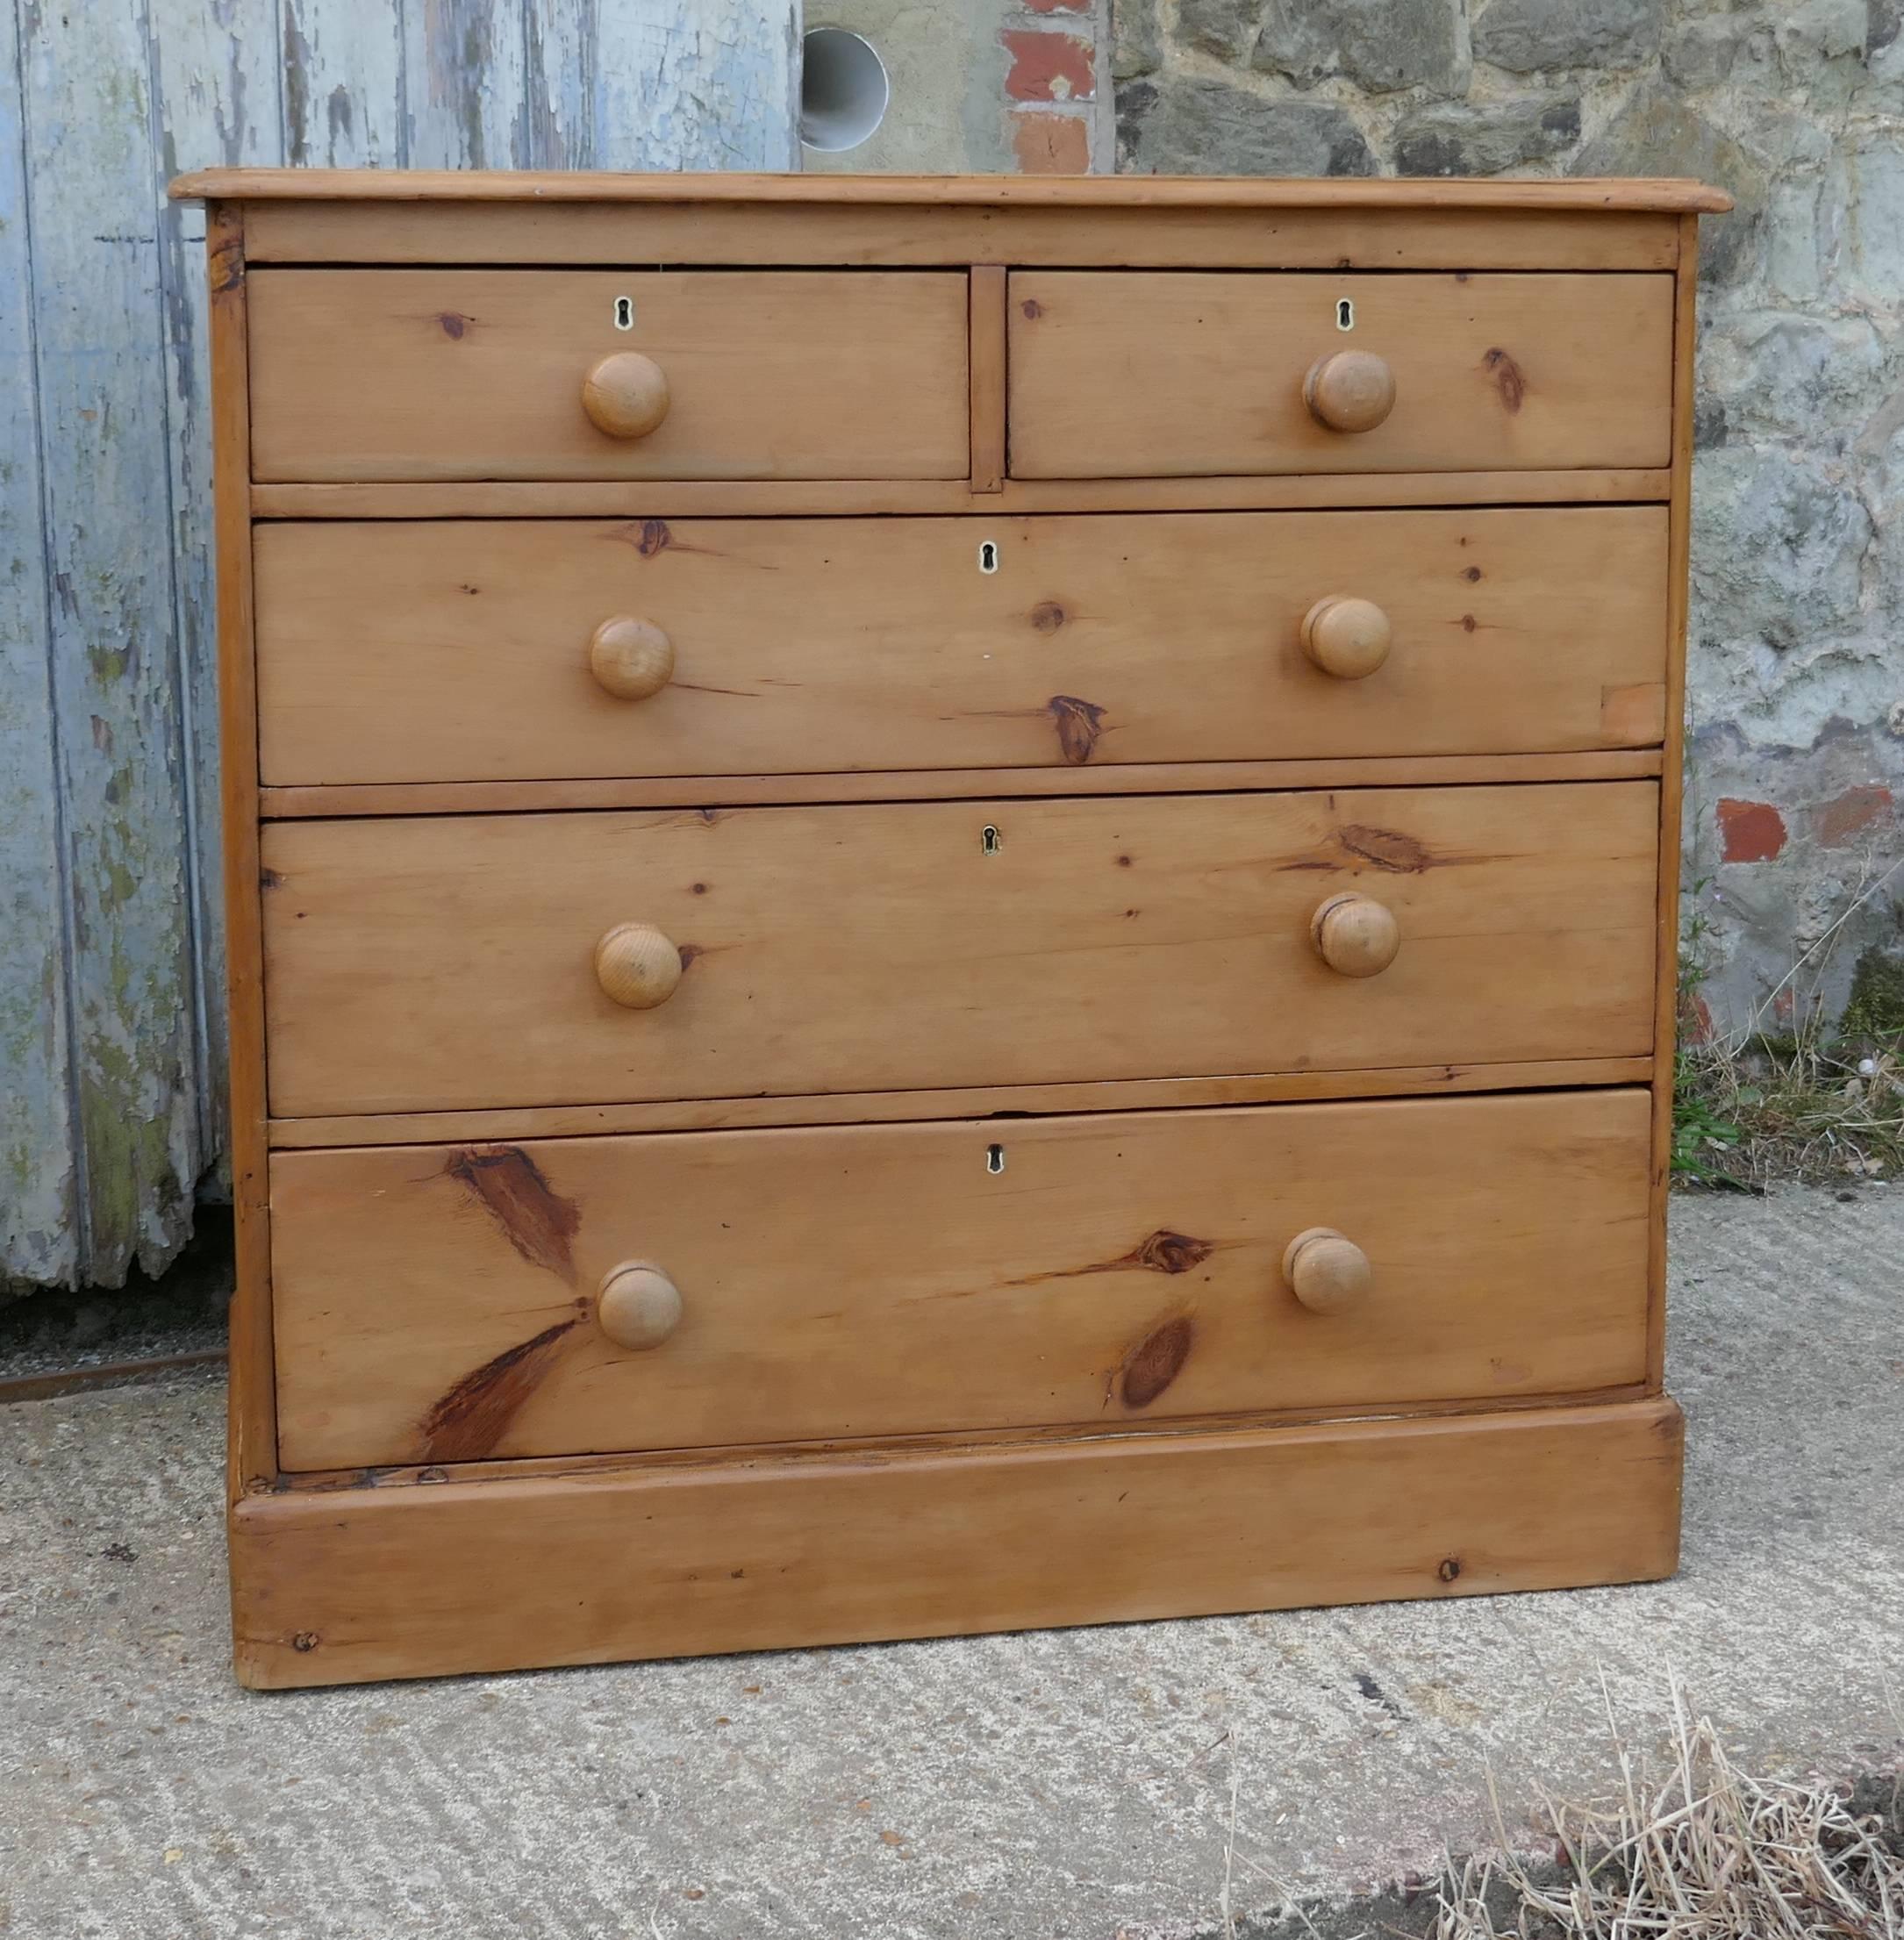 Large Victorian stripped pine chest of drawers, 1890


A large Victorian pine chest of drawers dates from 1890 it has been stripped and waxed.
This is a good quality pine chest, the chest has a moulded edge to the top and stands on a plinth, it